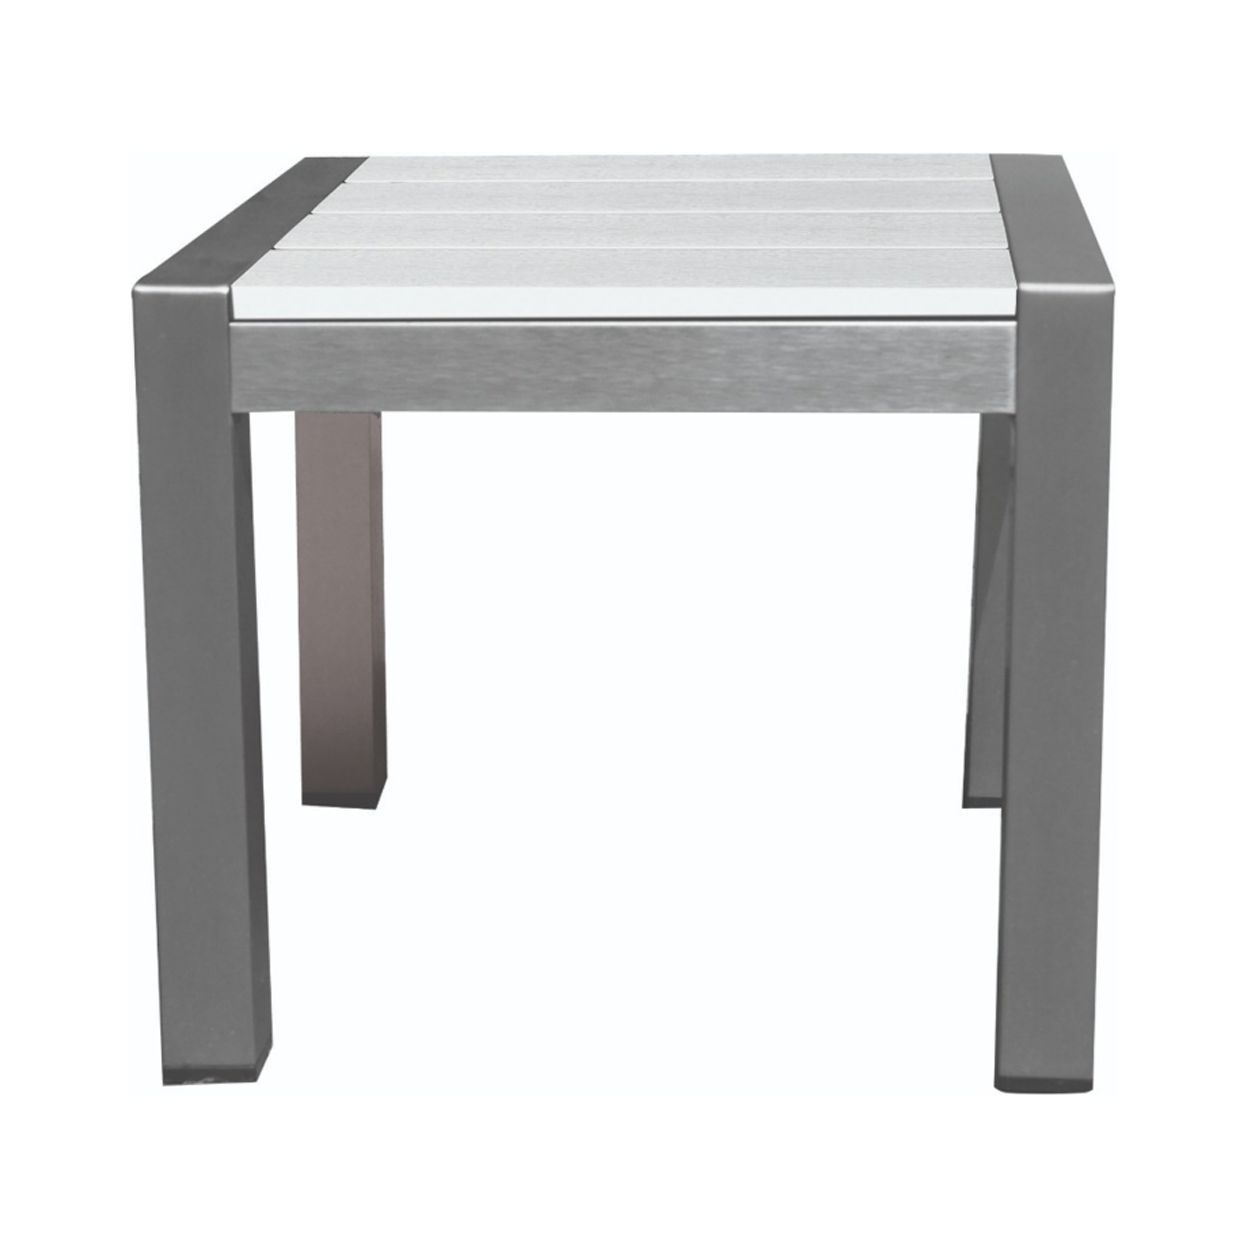 Versatile And Functional Easy Movable Outdoor Side Table, White- Saltoro Sherpi - image 2 of 3